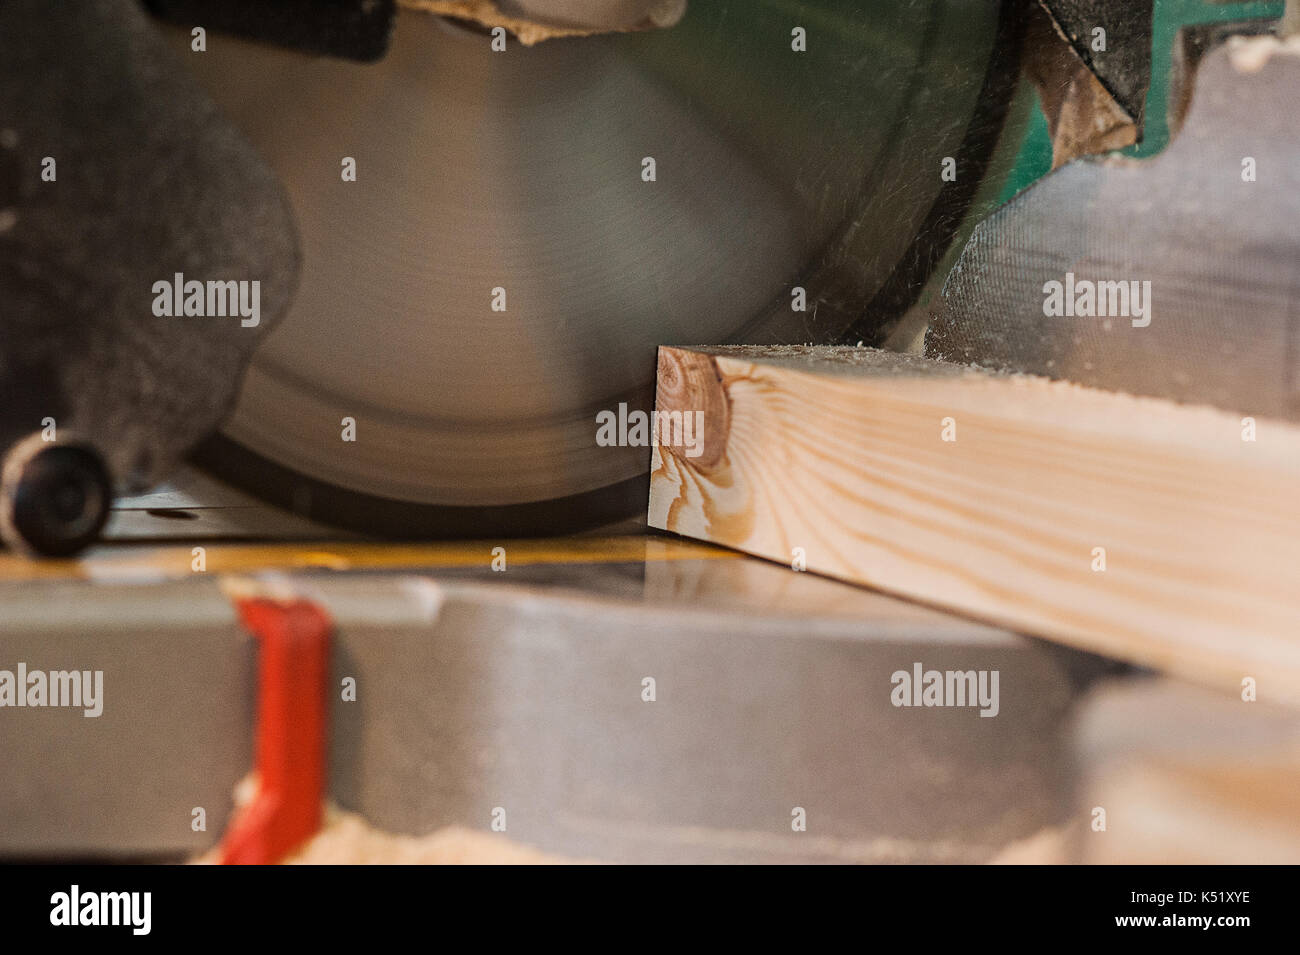 Circular saw with a wooden beam and measuring scale. Sawing a wooden beam with a circular saw. in progress view Stock Photo